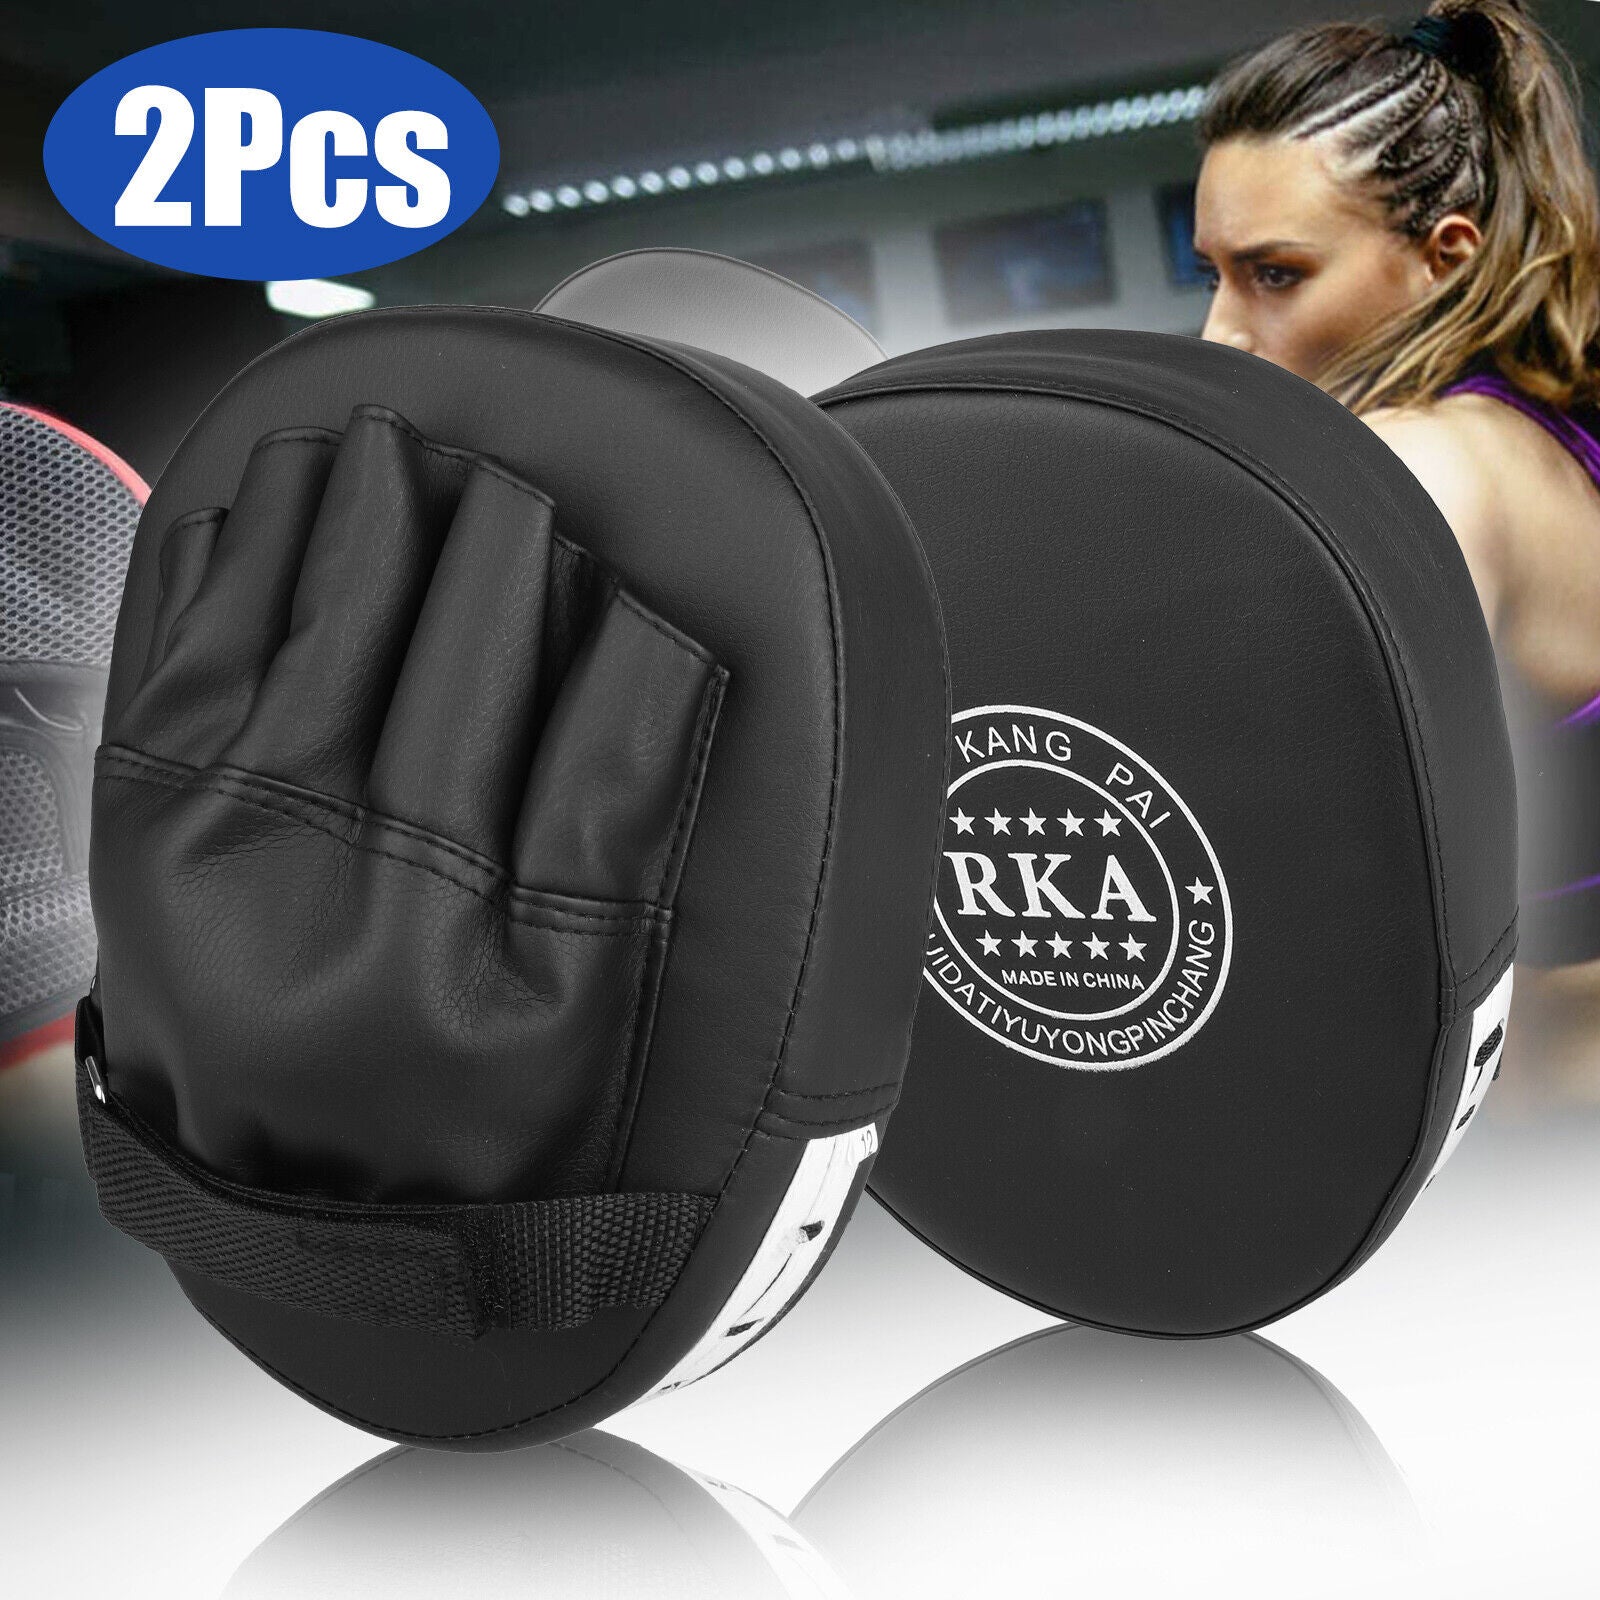 2PCS MMA Boxing Punching Mitts for Sparring & Training